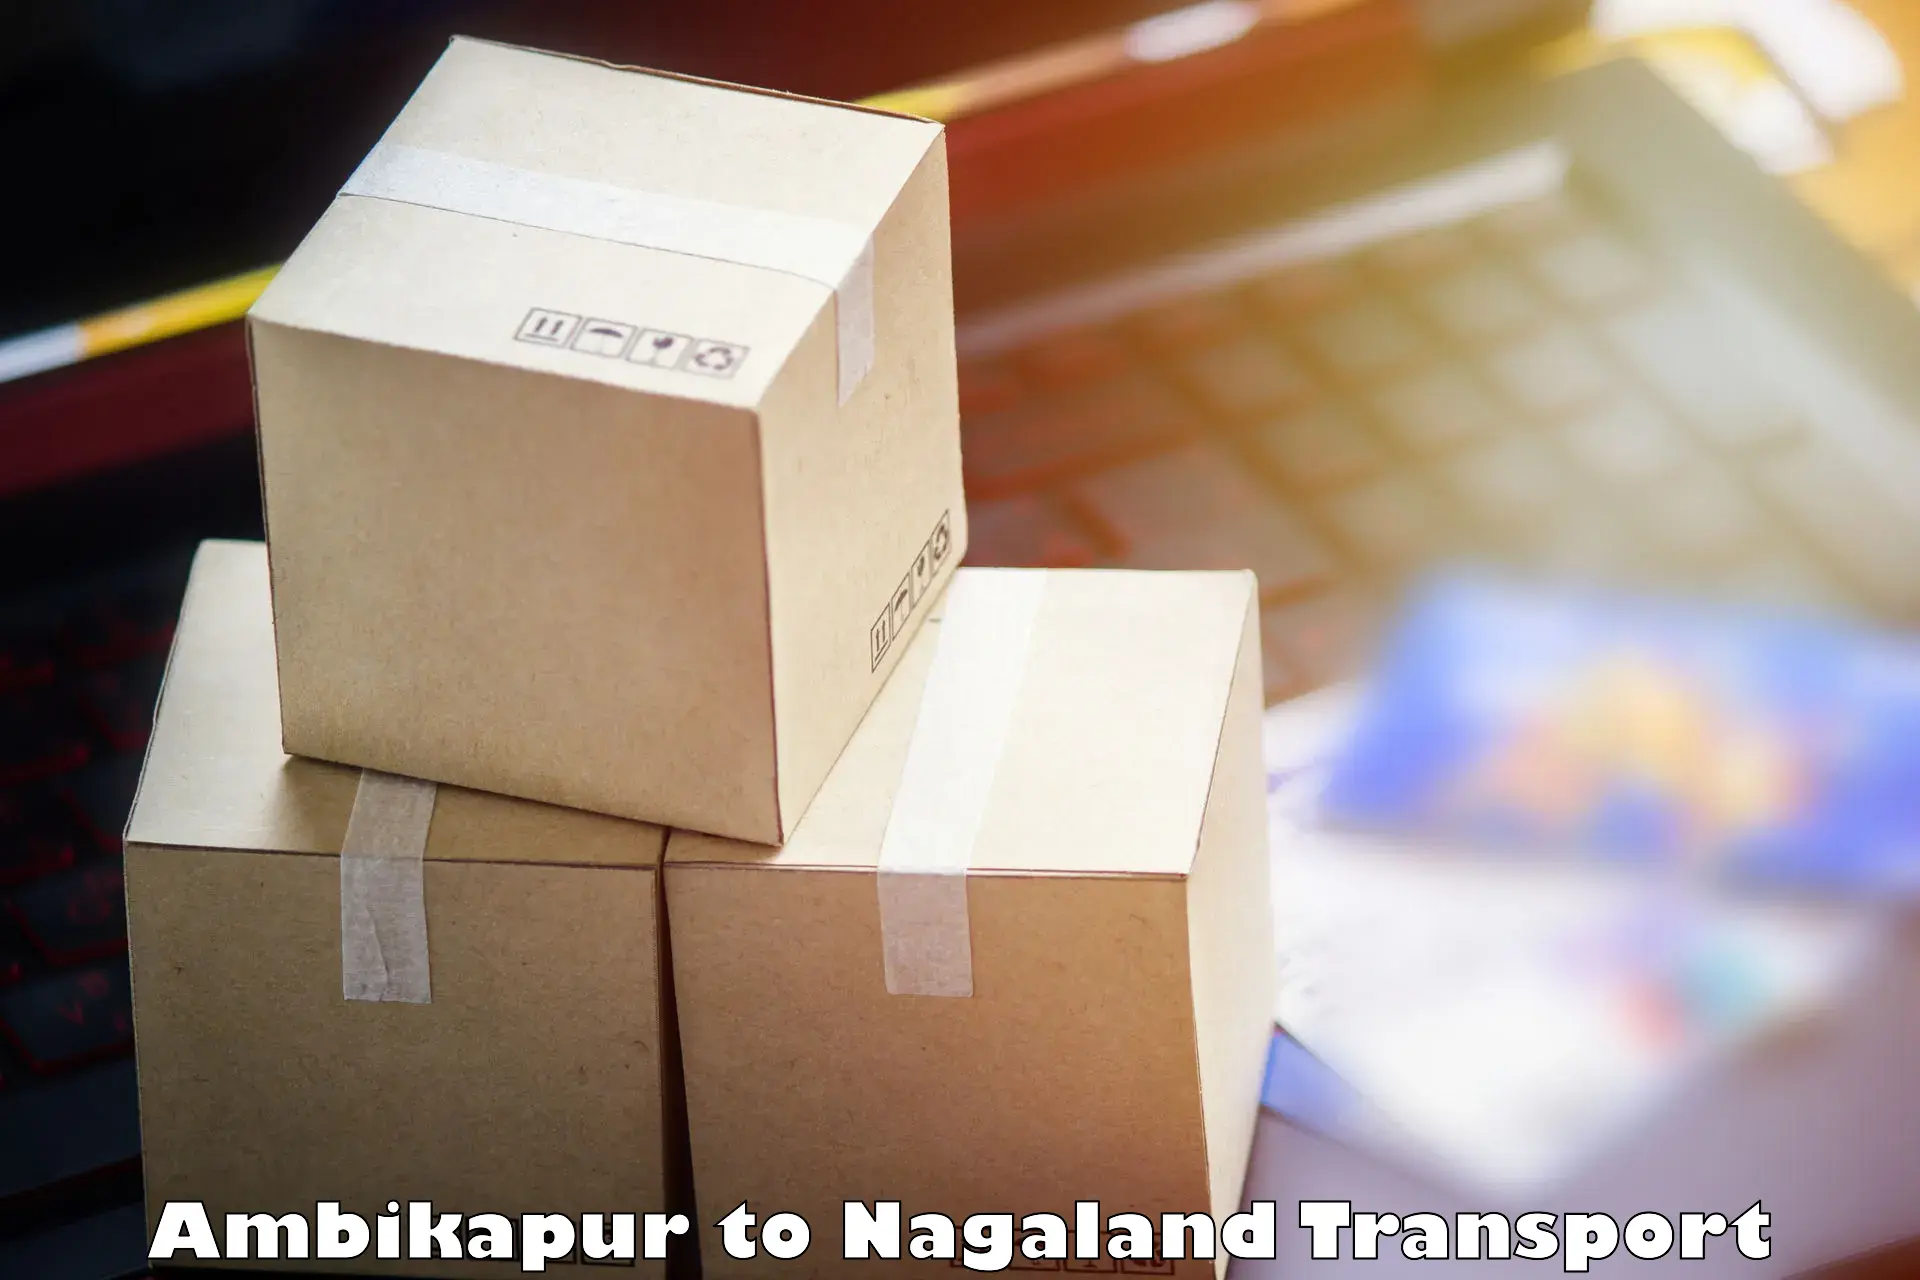 Road transport online services Ambikapur to Nagaland